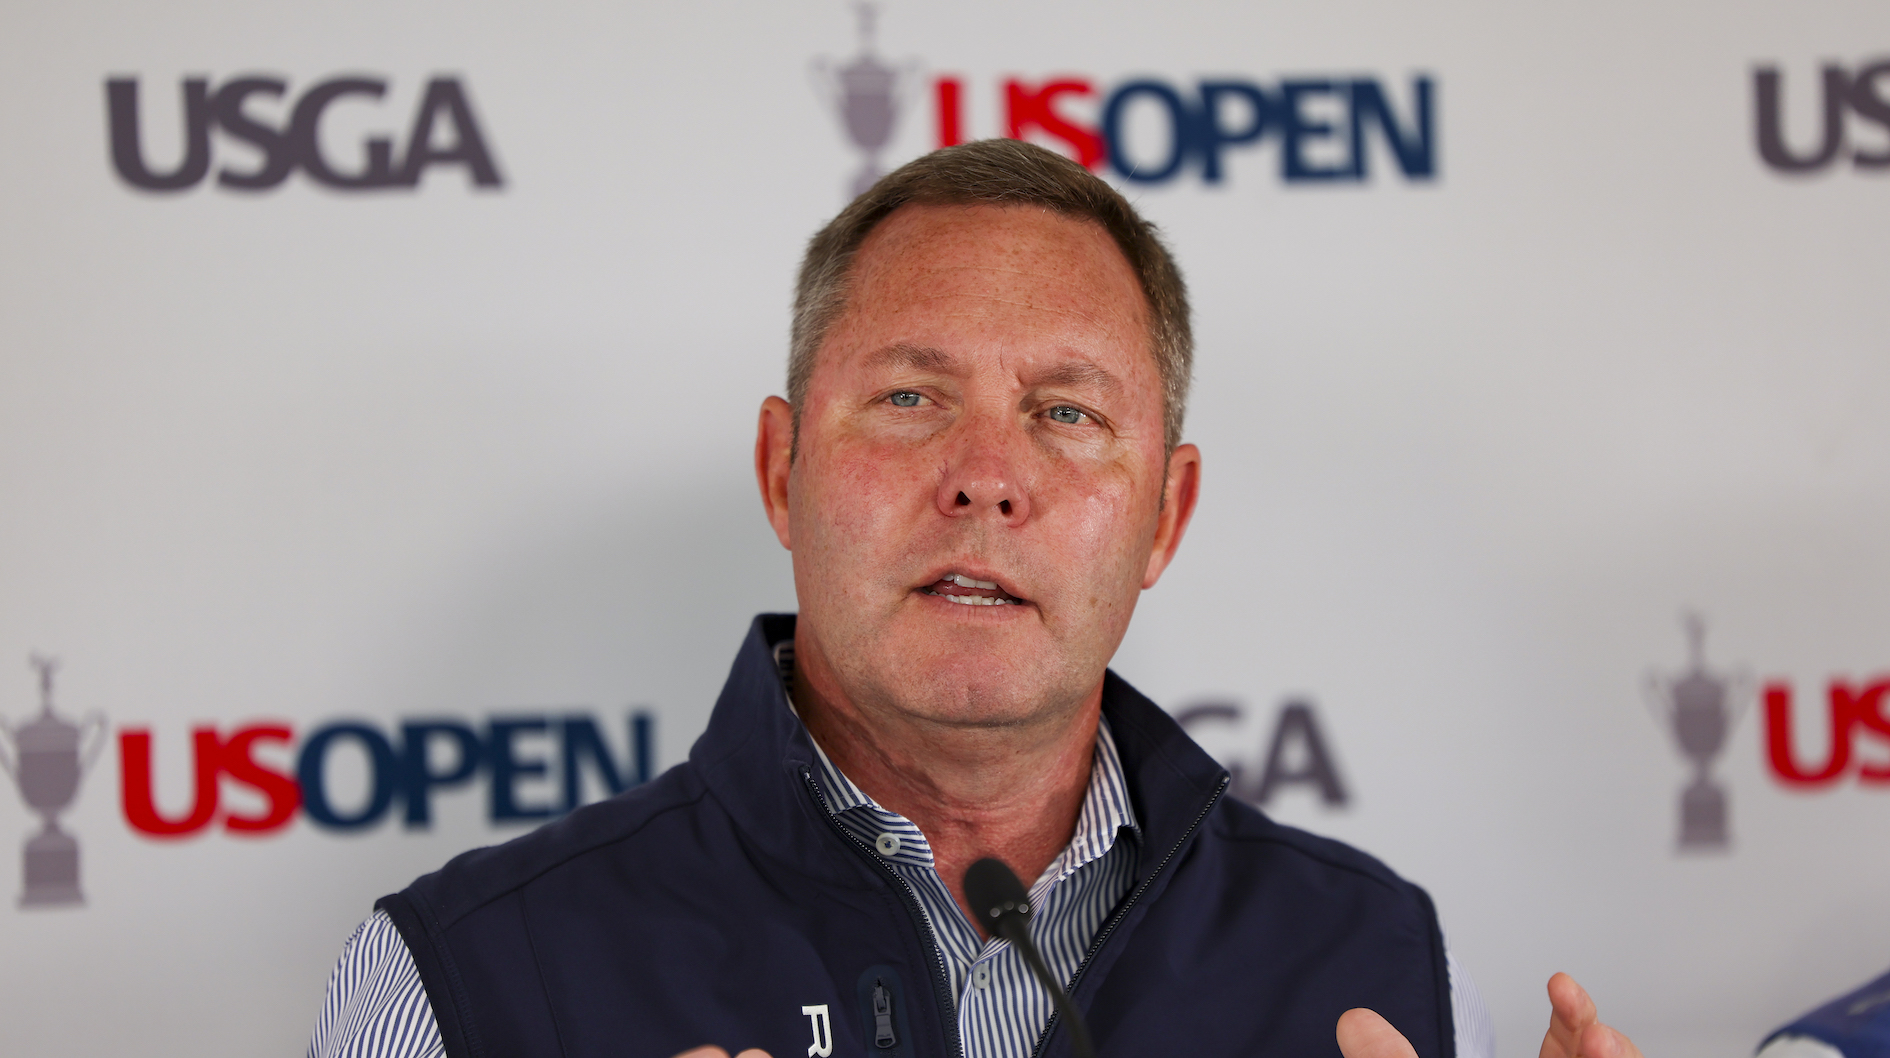 USGA chief foresees changes to LIV players at U.S. Open Golf